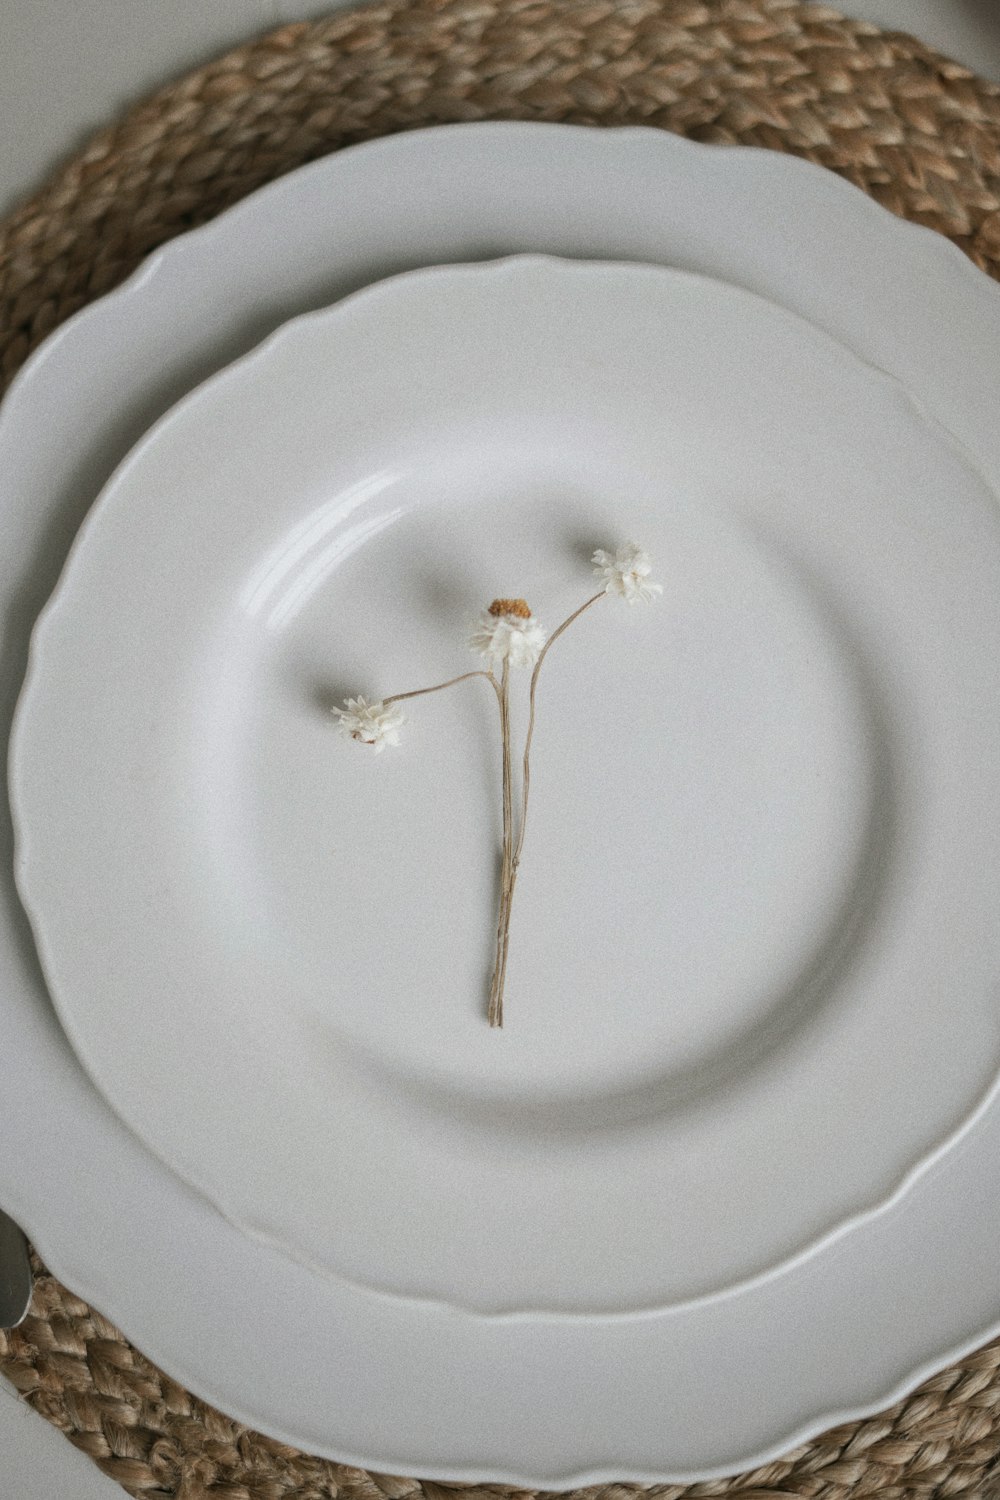 a close up of a plate with a flower on it